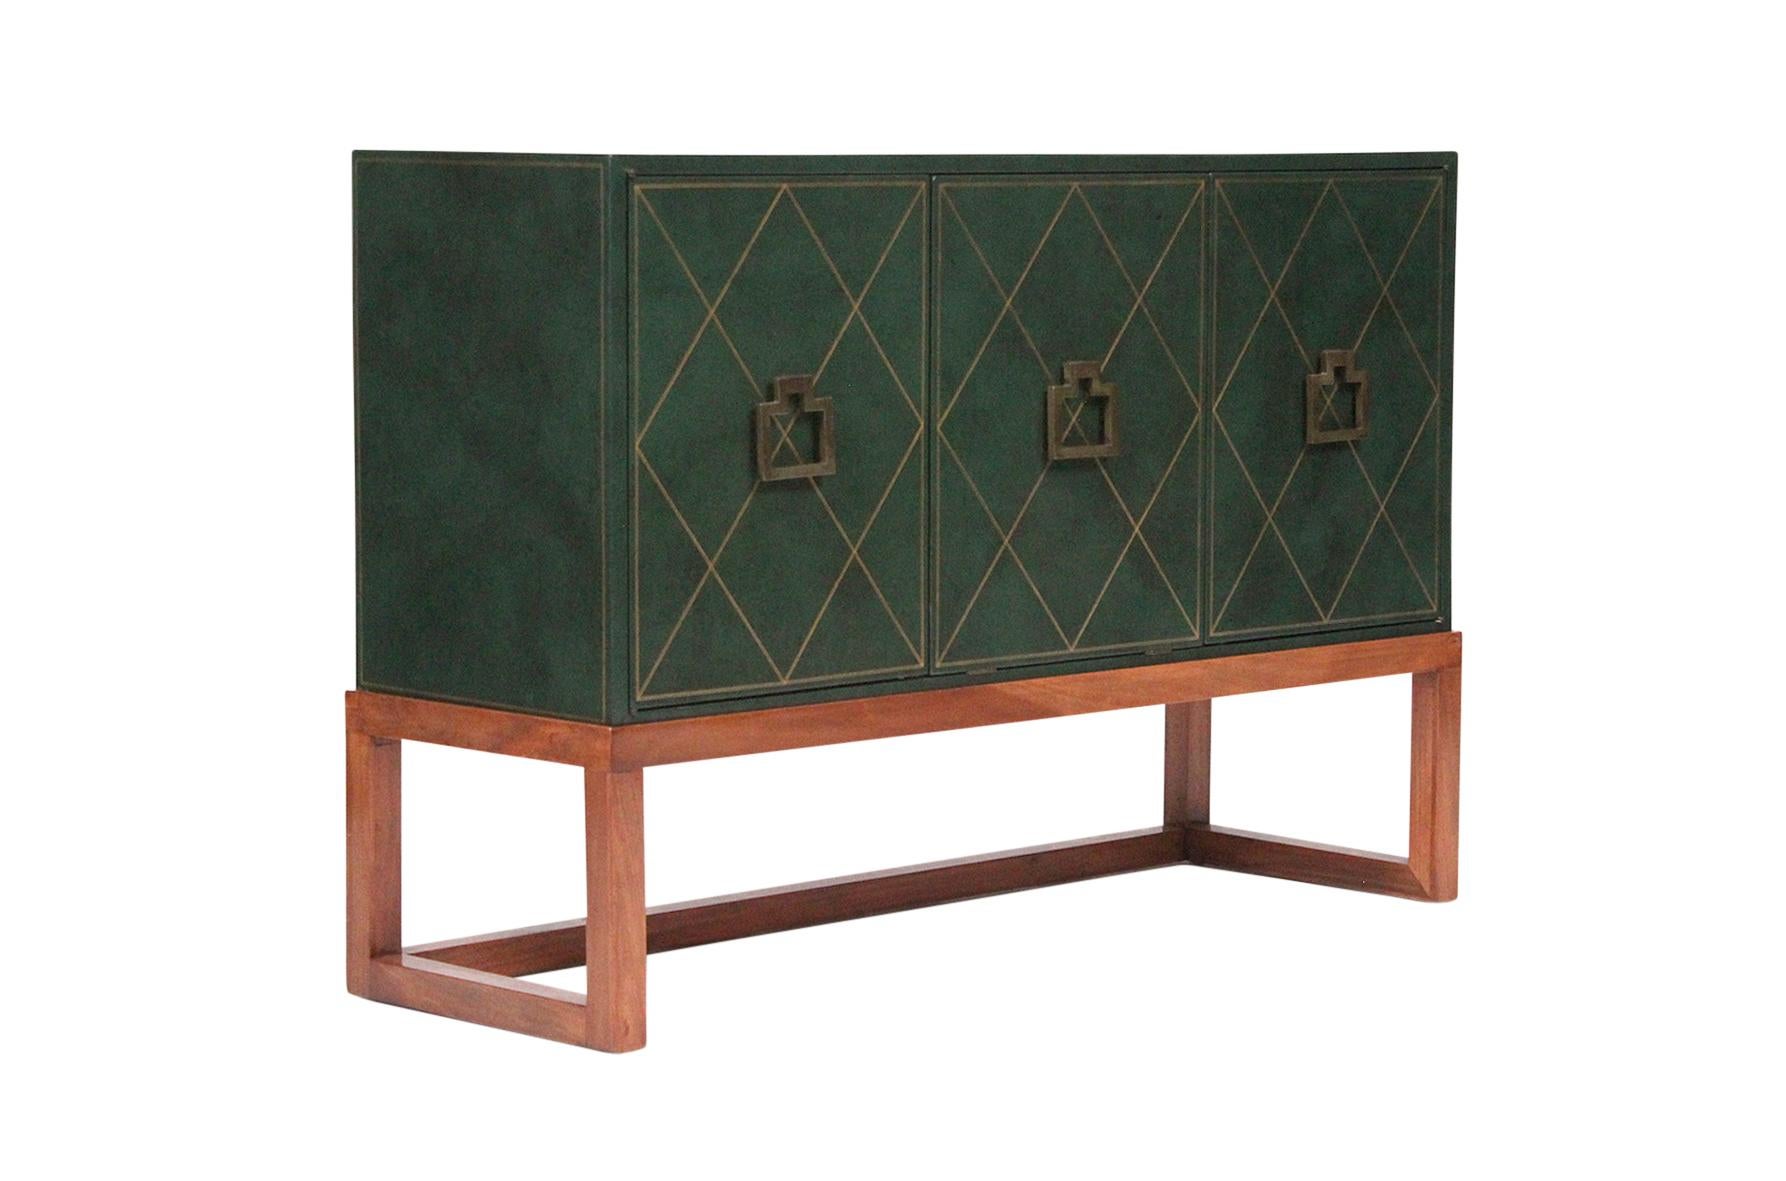 Tommi Parzinger for Charak Modern three leather-clad cabinet. Leather finish tooled and gilded in a diamond pattern. Three sections featuring coral pink interior. Two side doors conceal shelving while center door drops to reveal two drawers in